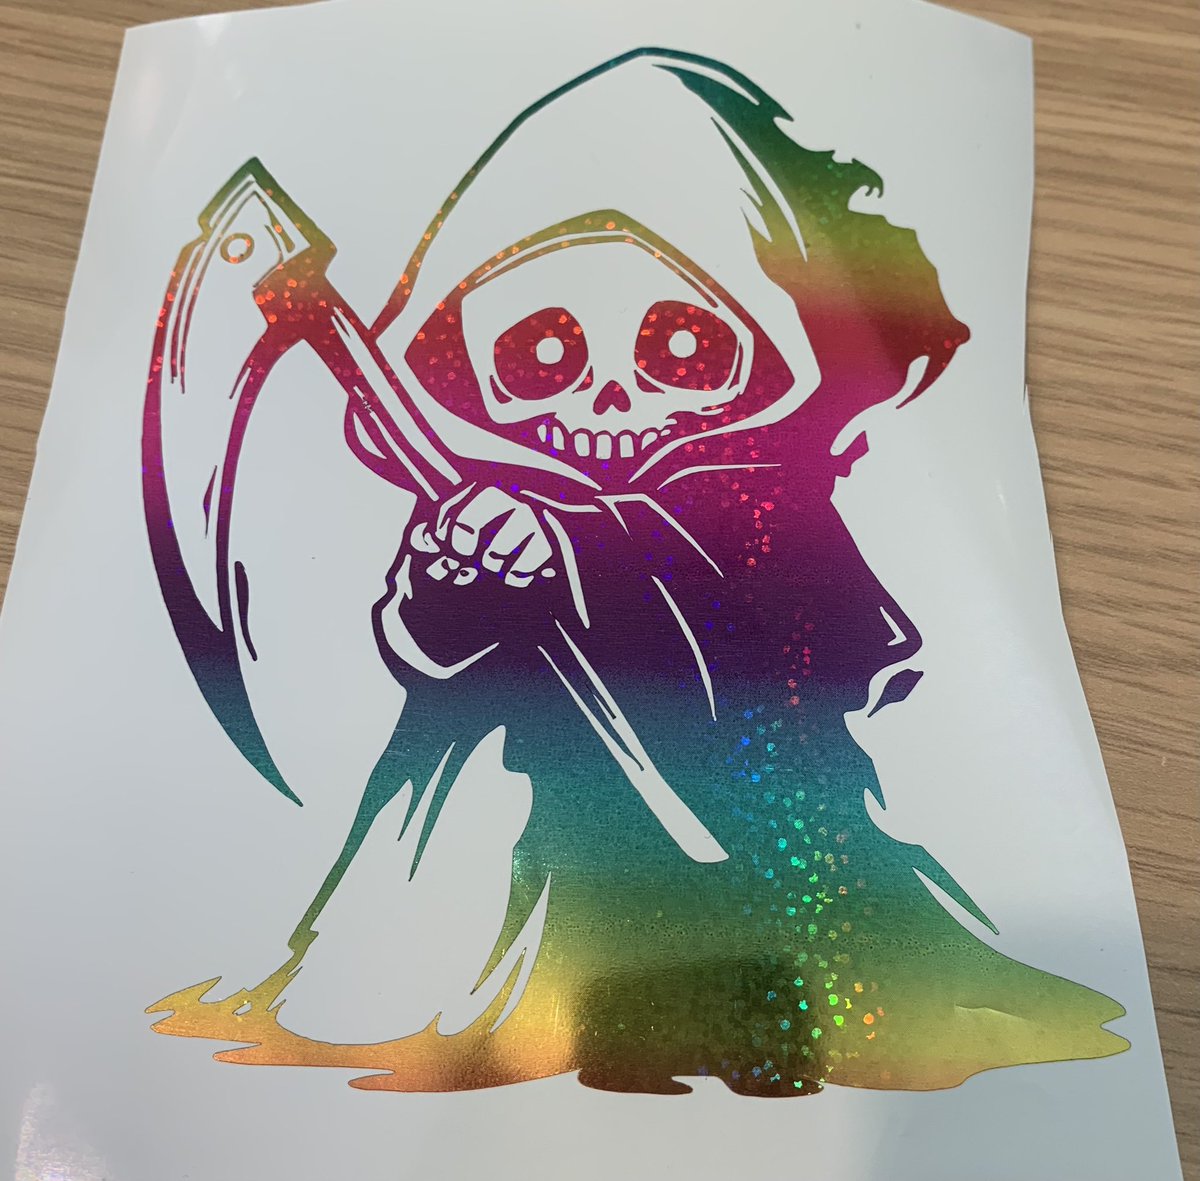 Our cute grim reaper decal in our rainbow vinyl for an order cut at 5 inches #rainbow #vinyldecal #mhhsbd #decal #grimreaper #order